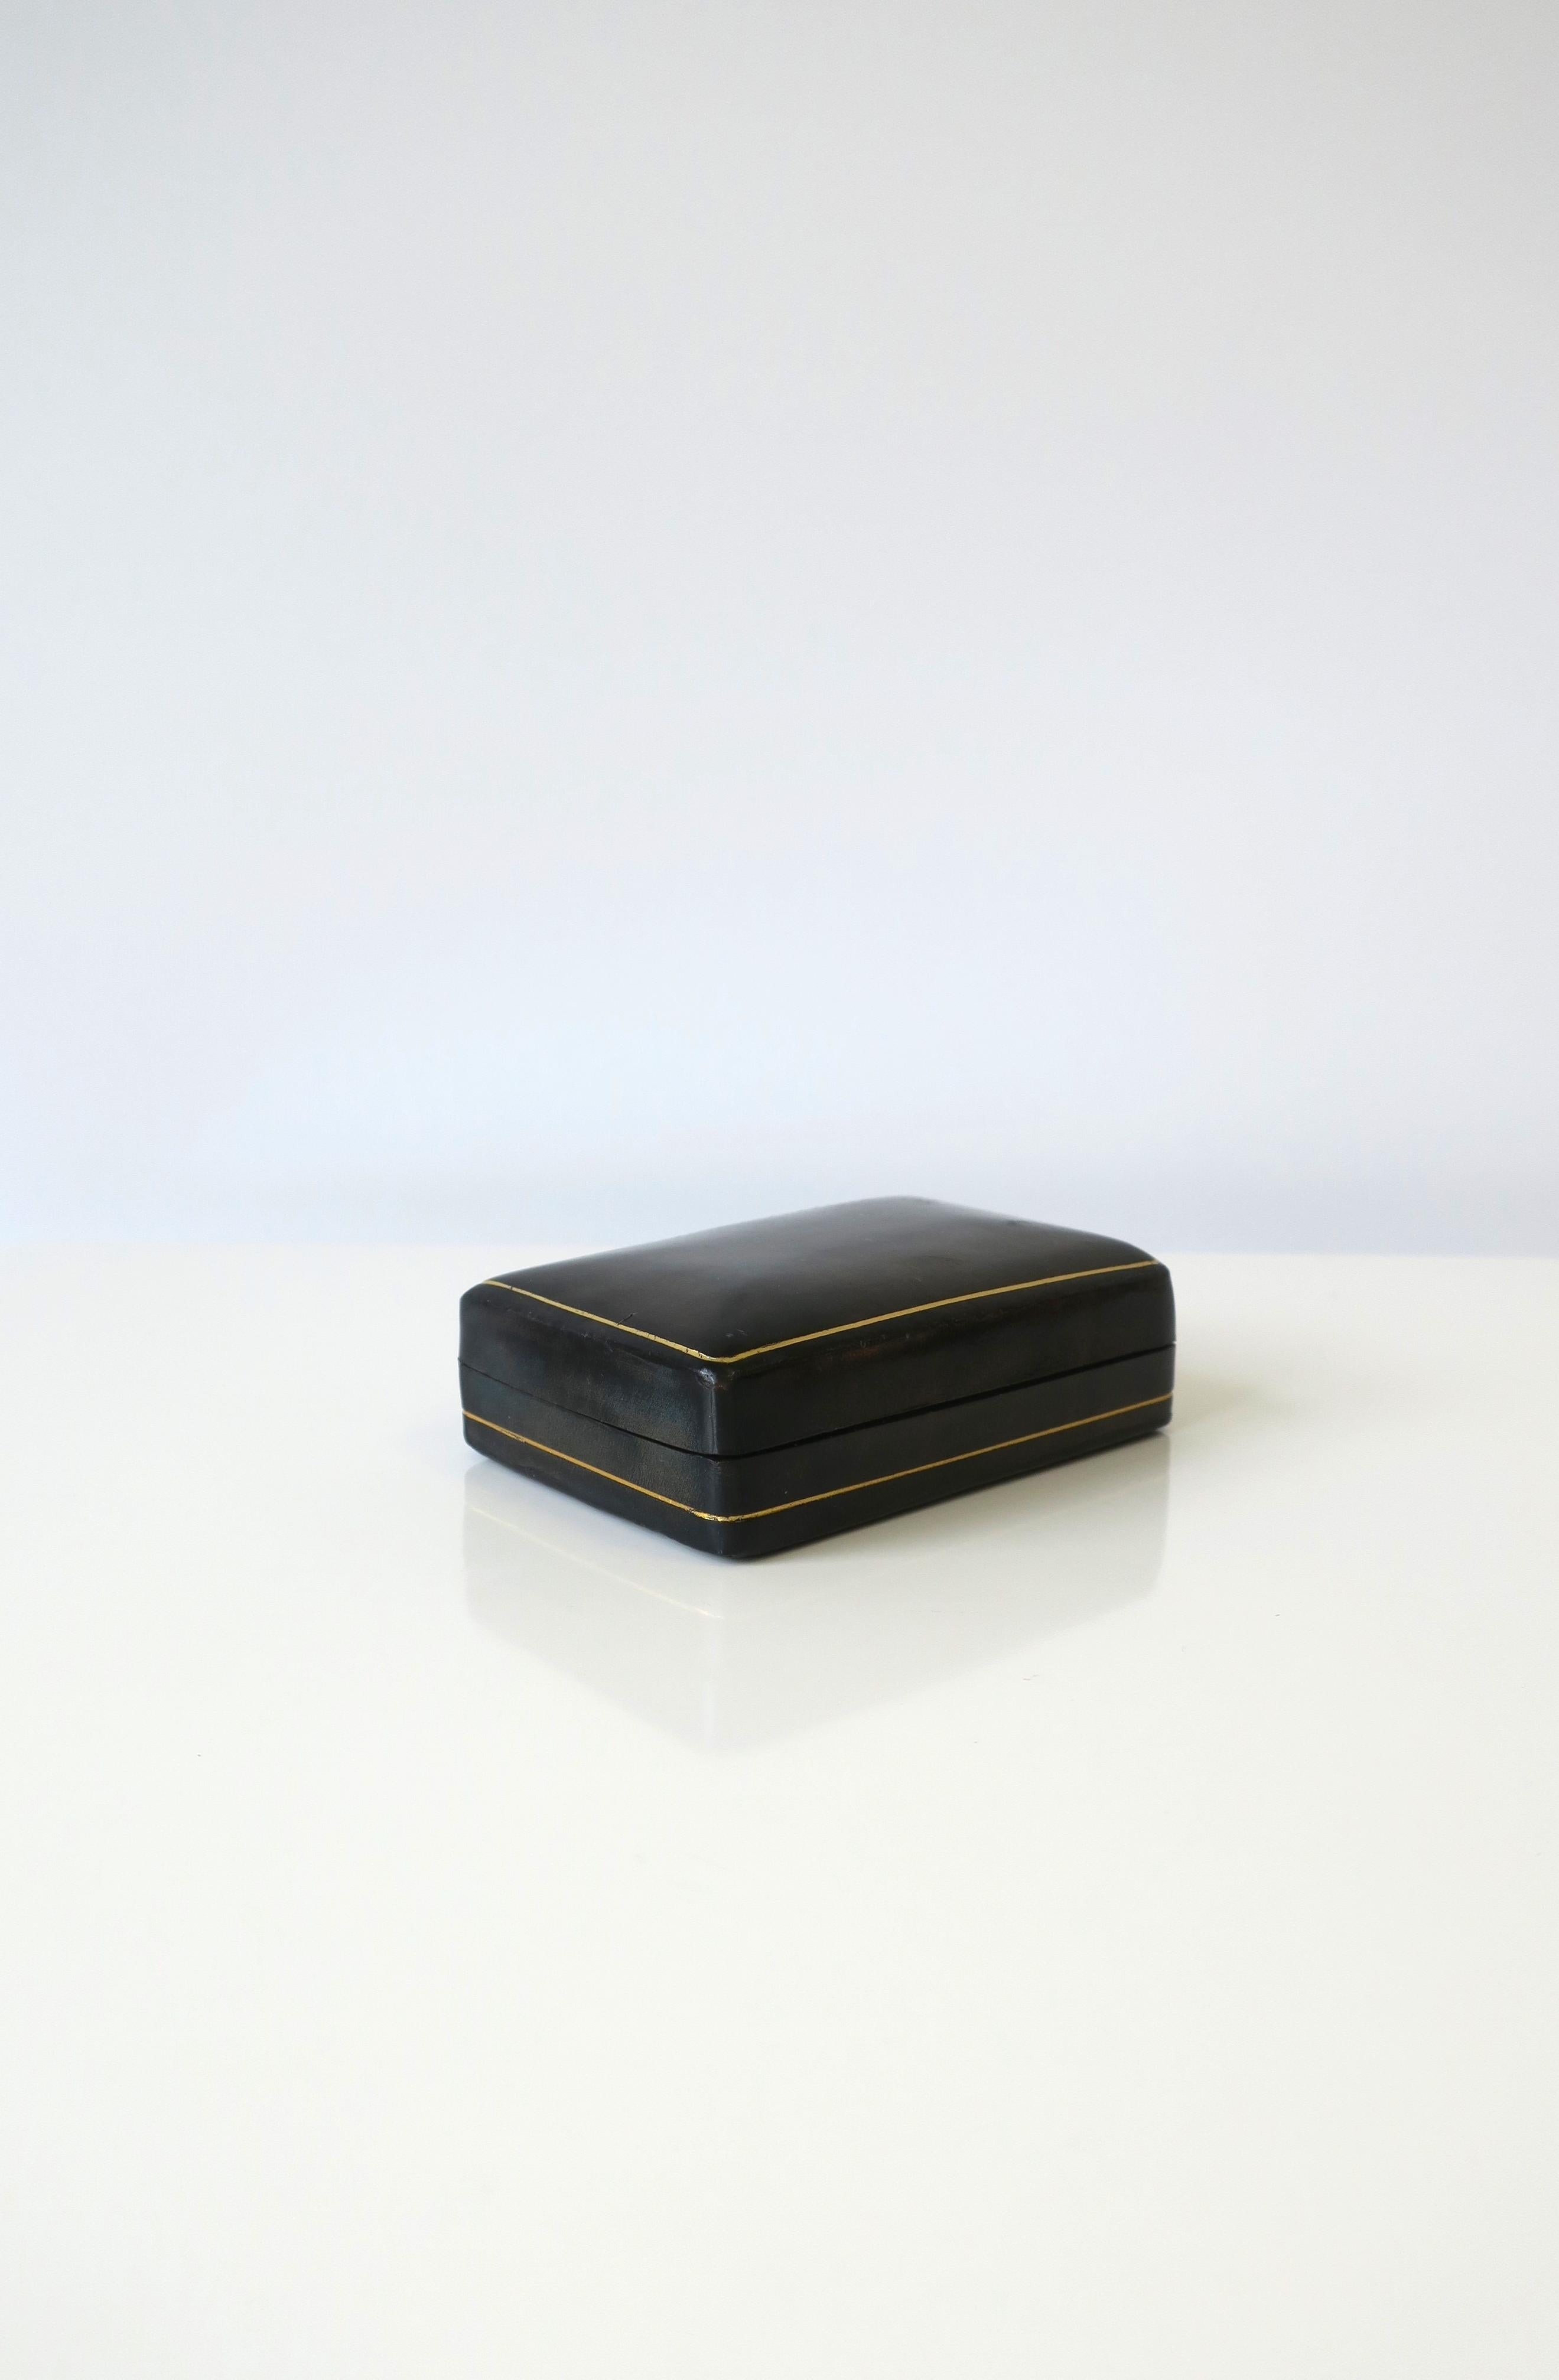 Italian Leather Box in Dark Grey Charcoal In Good Condition For Sale In New York, NY